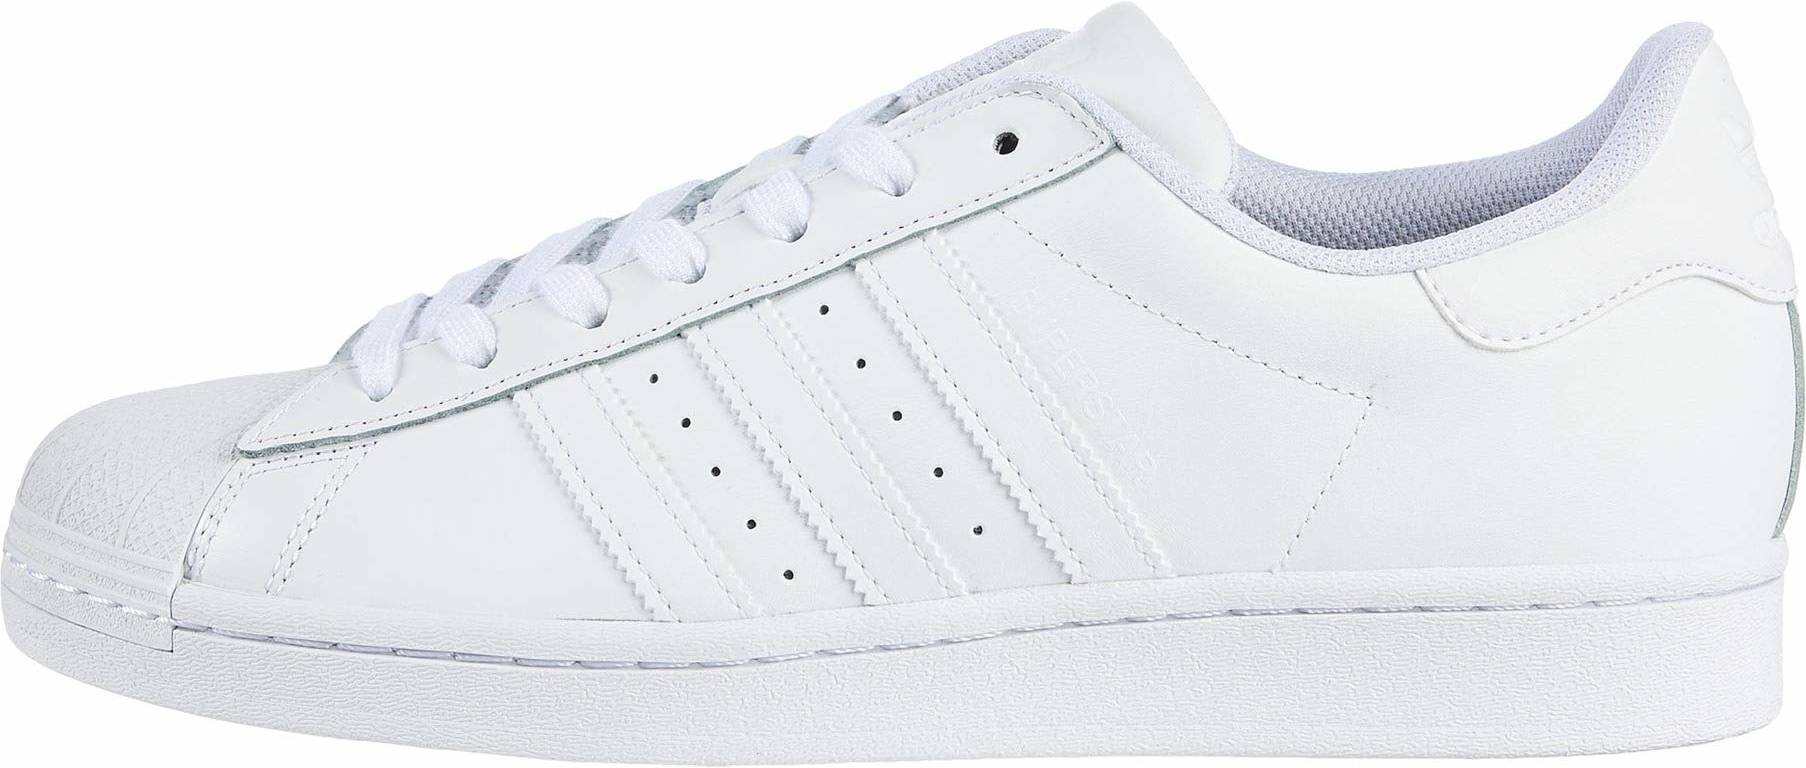 Only $15 + Review of Adidas Superstar 